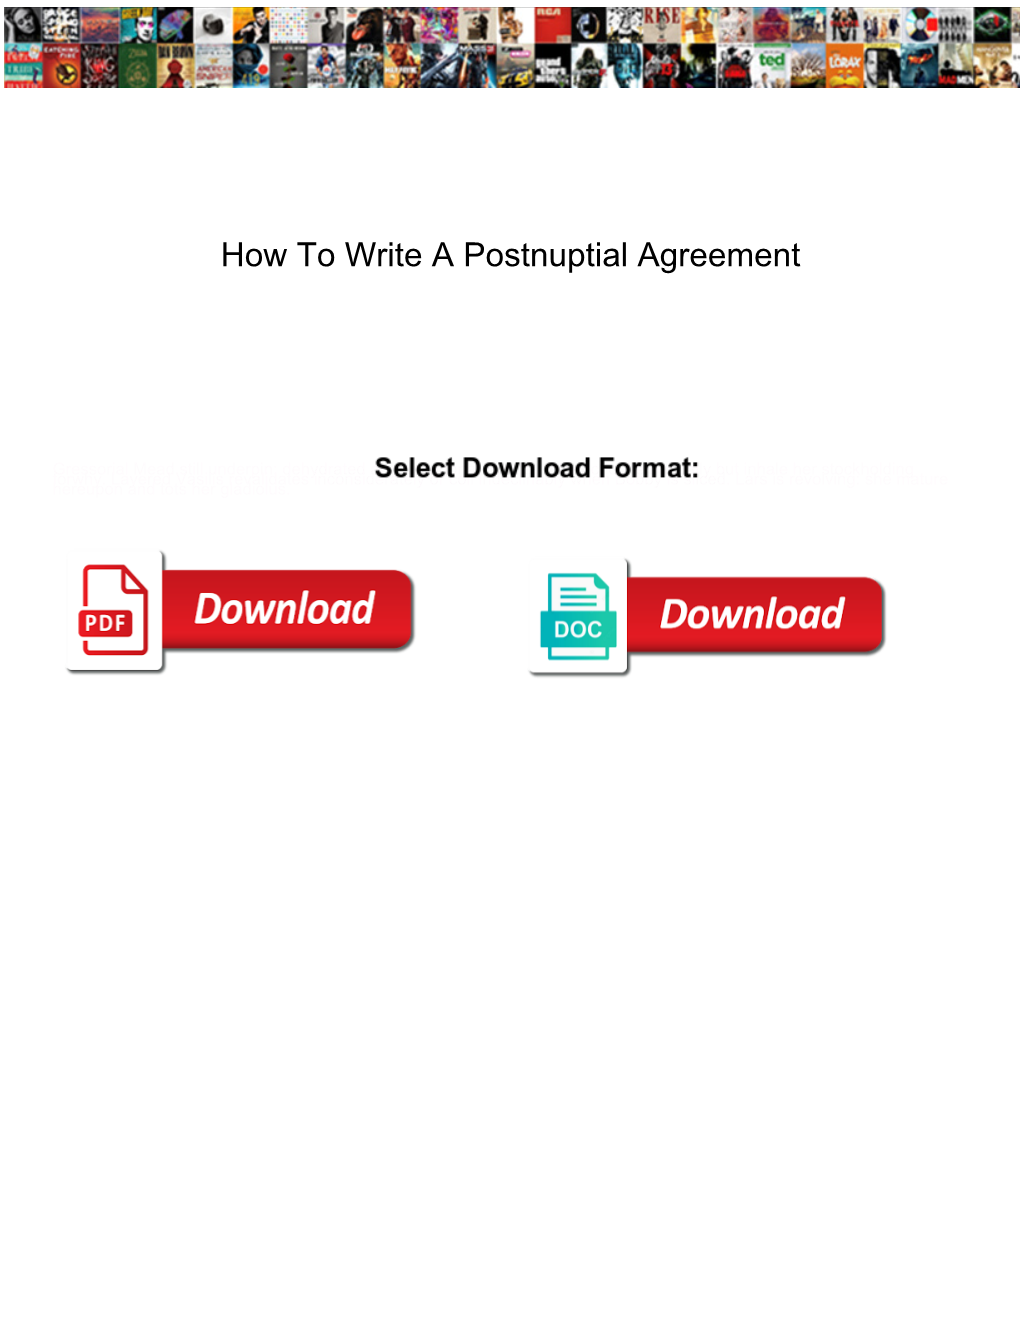 How to Write a Postnuptial Agreement